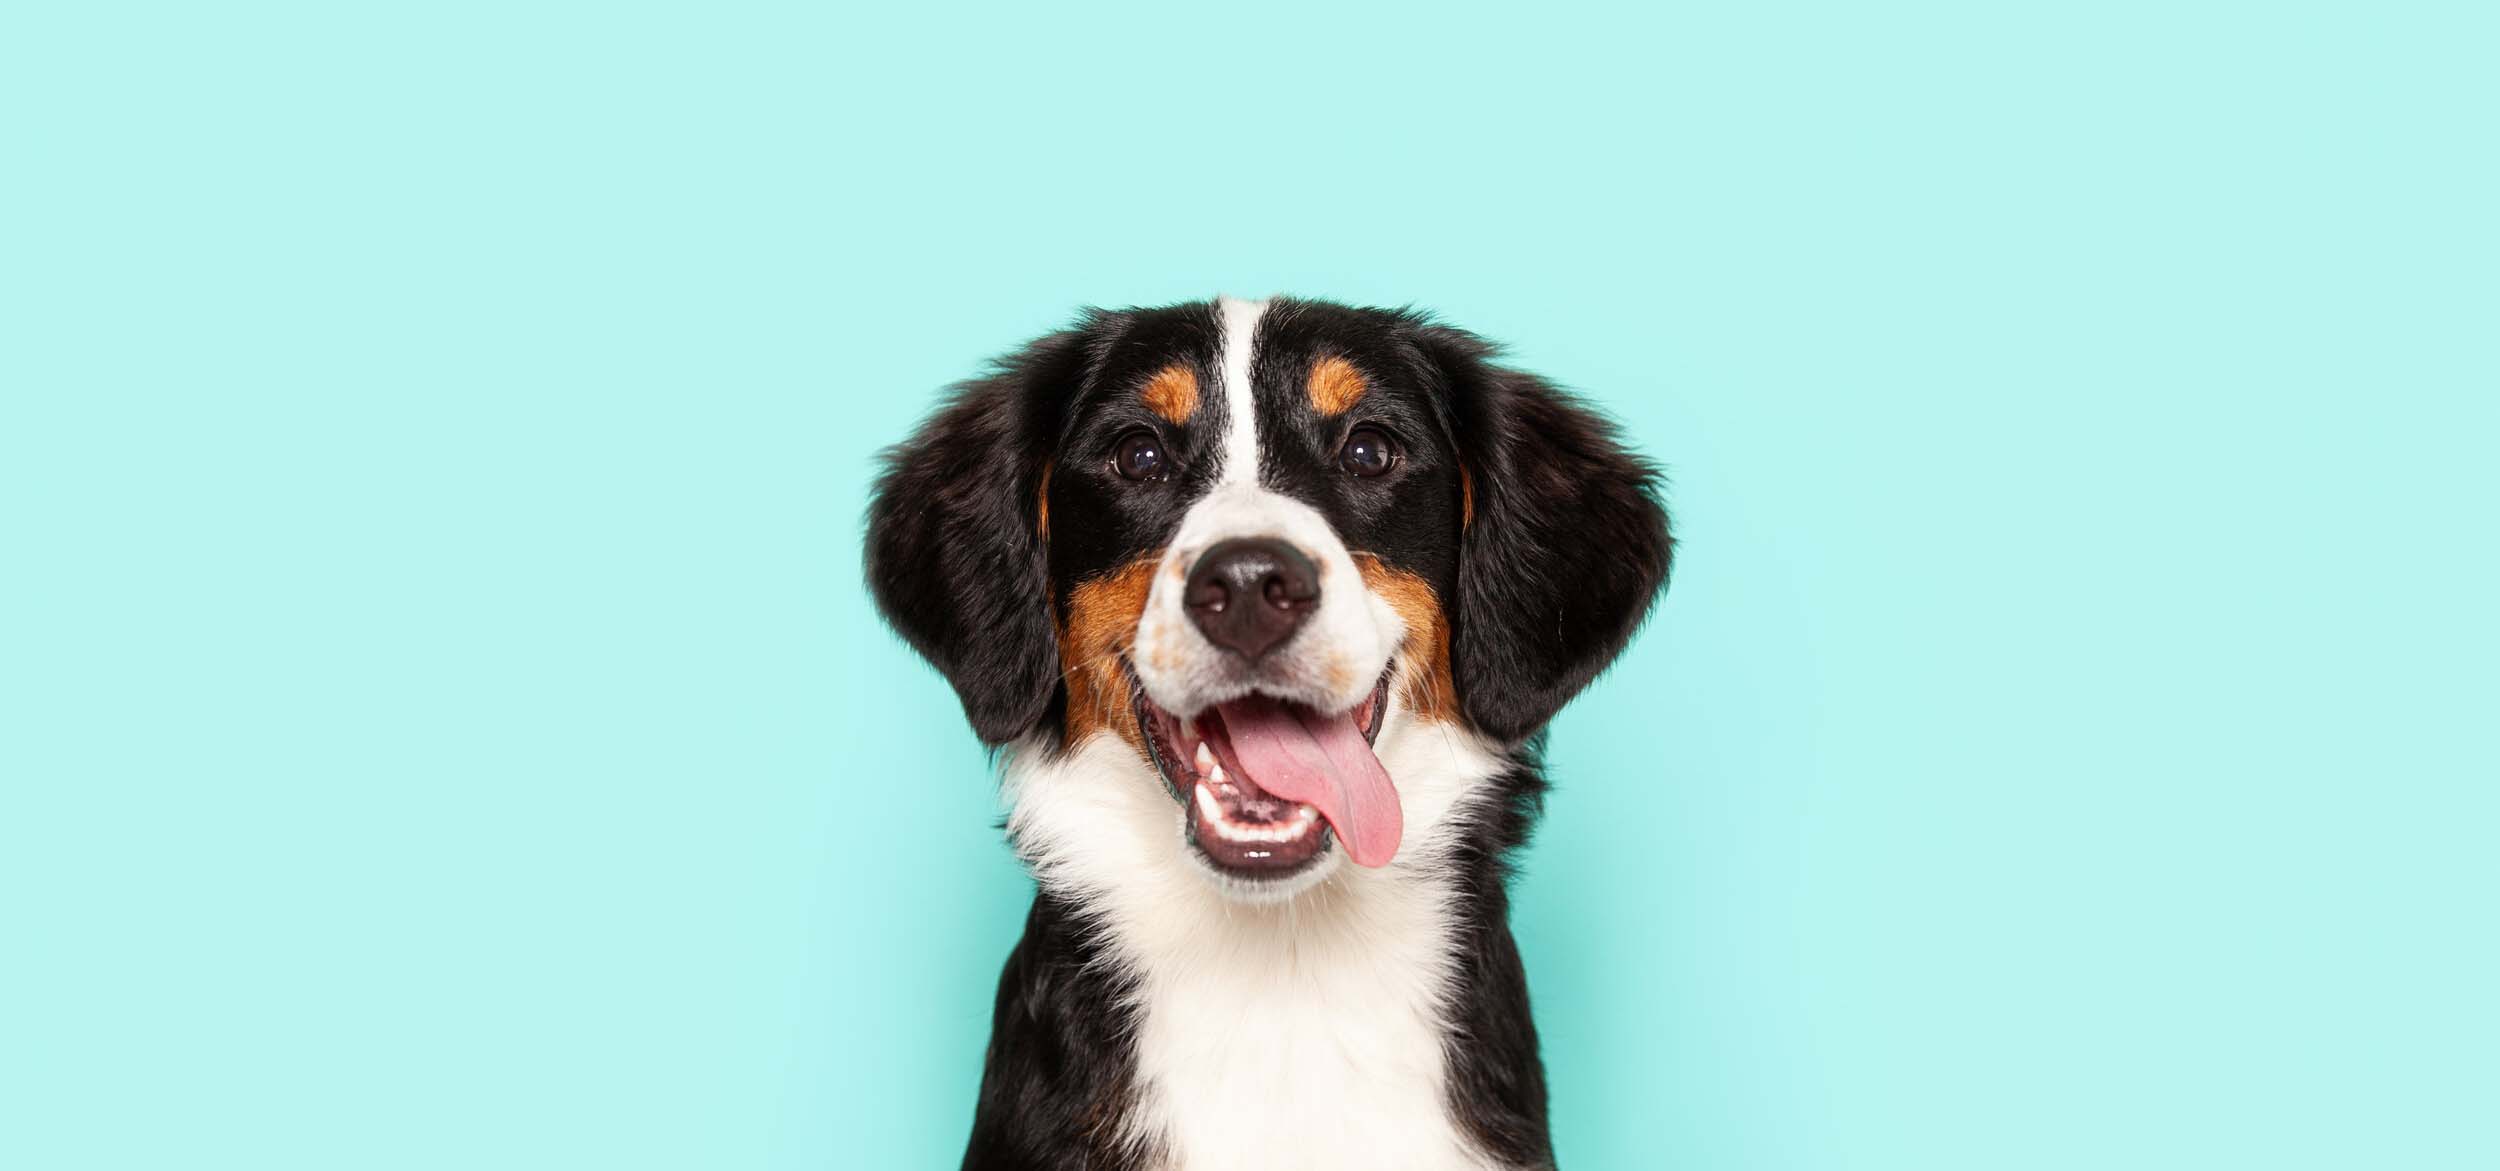 Photo of a dog with black and brown spots in front of a blue wall.